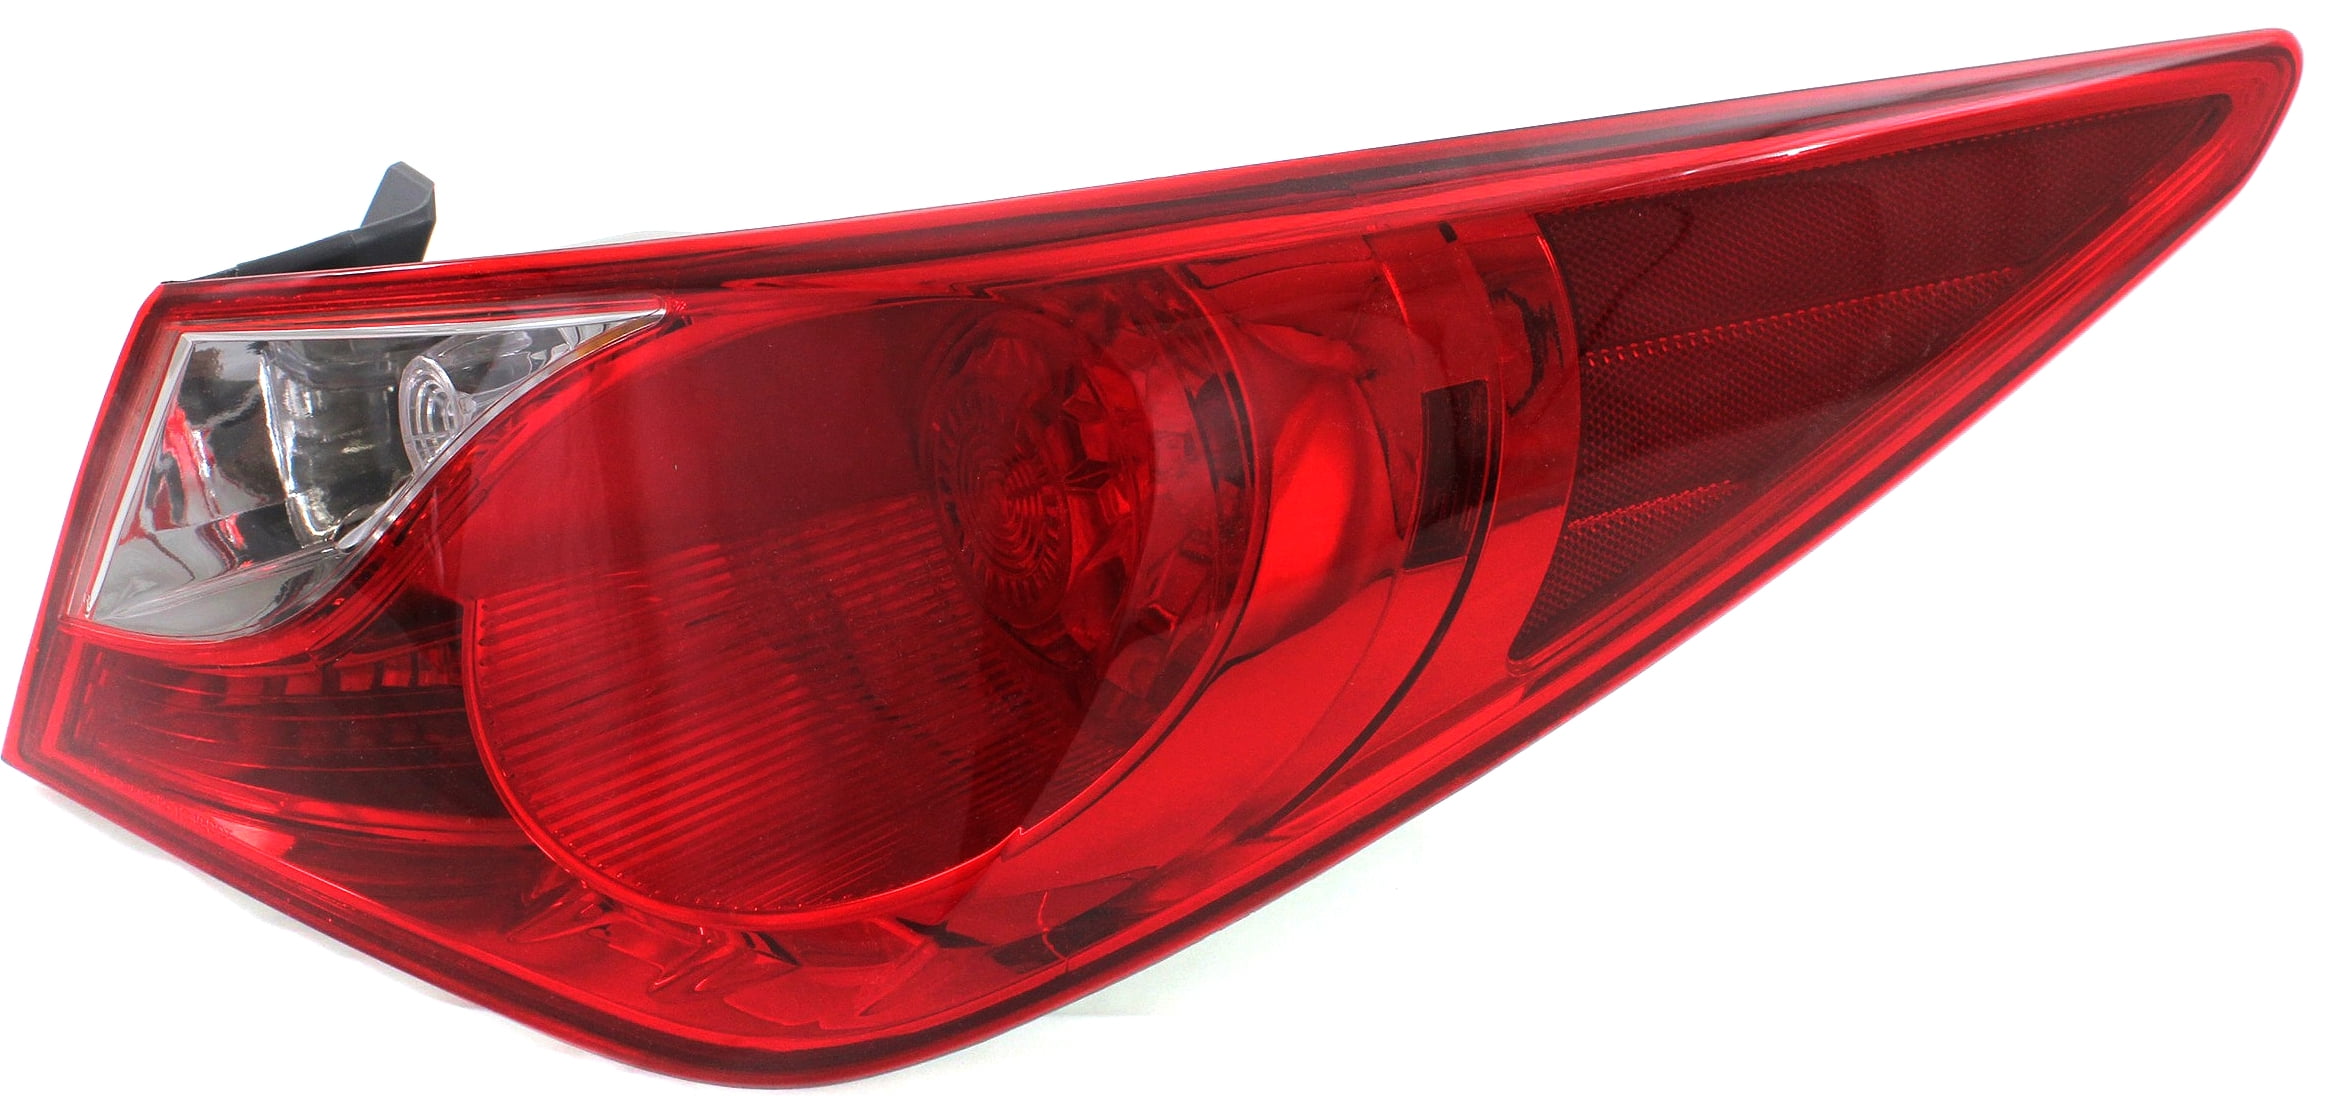 Evan-Fischer Tail Light Assembly Compatible with 2011-2014 Hyundai Sonata Outer Bulb Type Passenger Side 